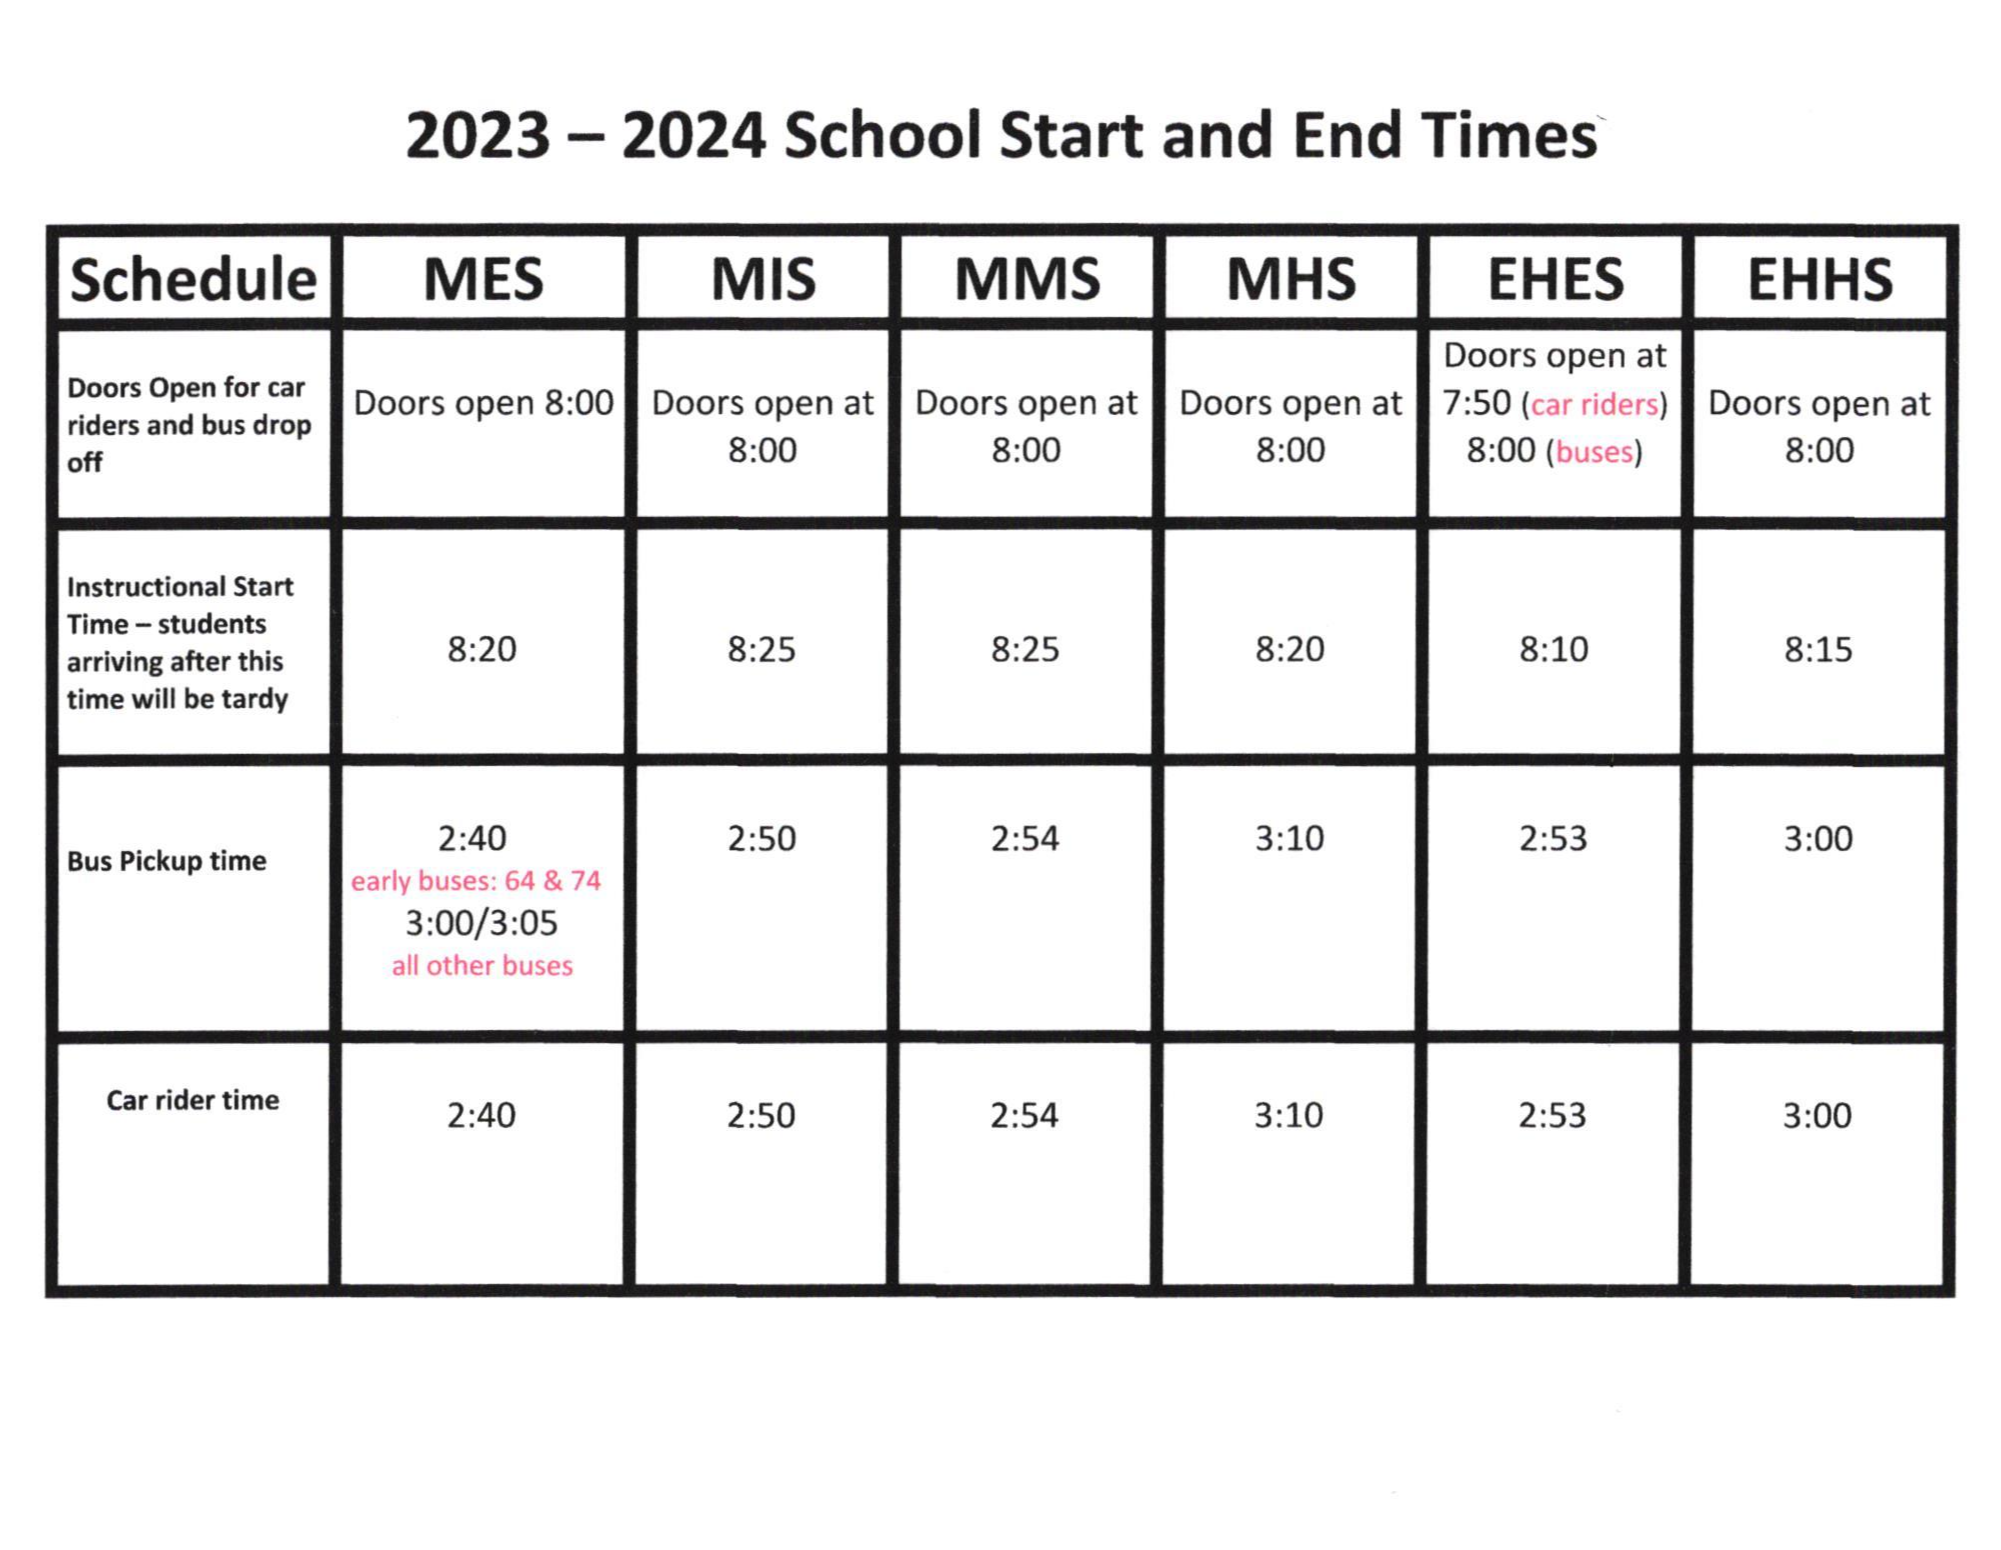 2023-2024 School Year Start and End Times